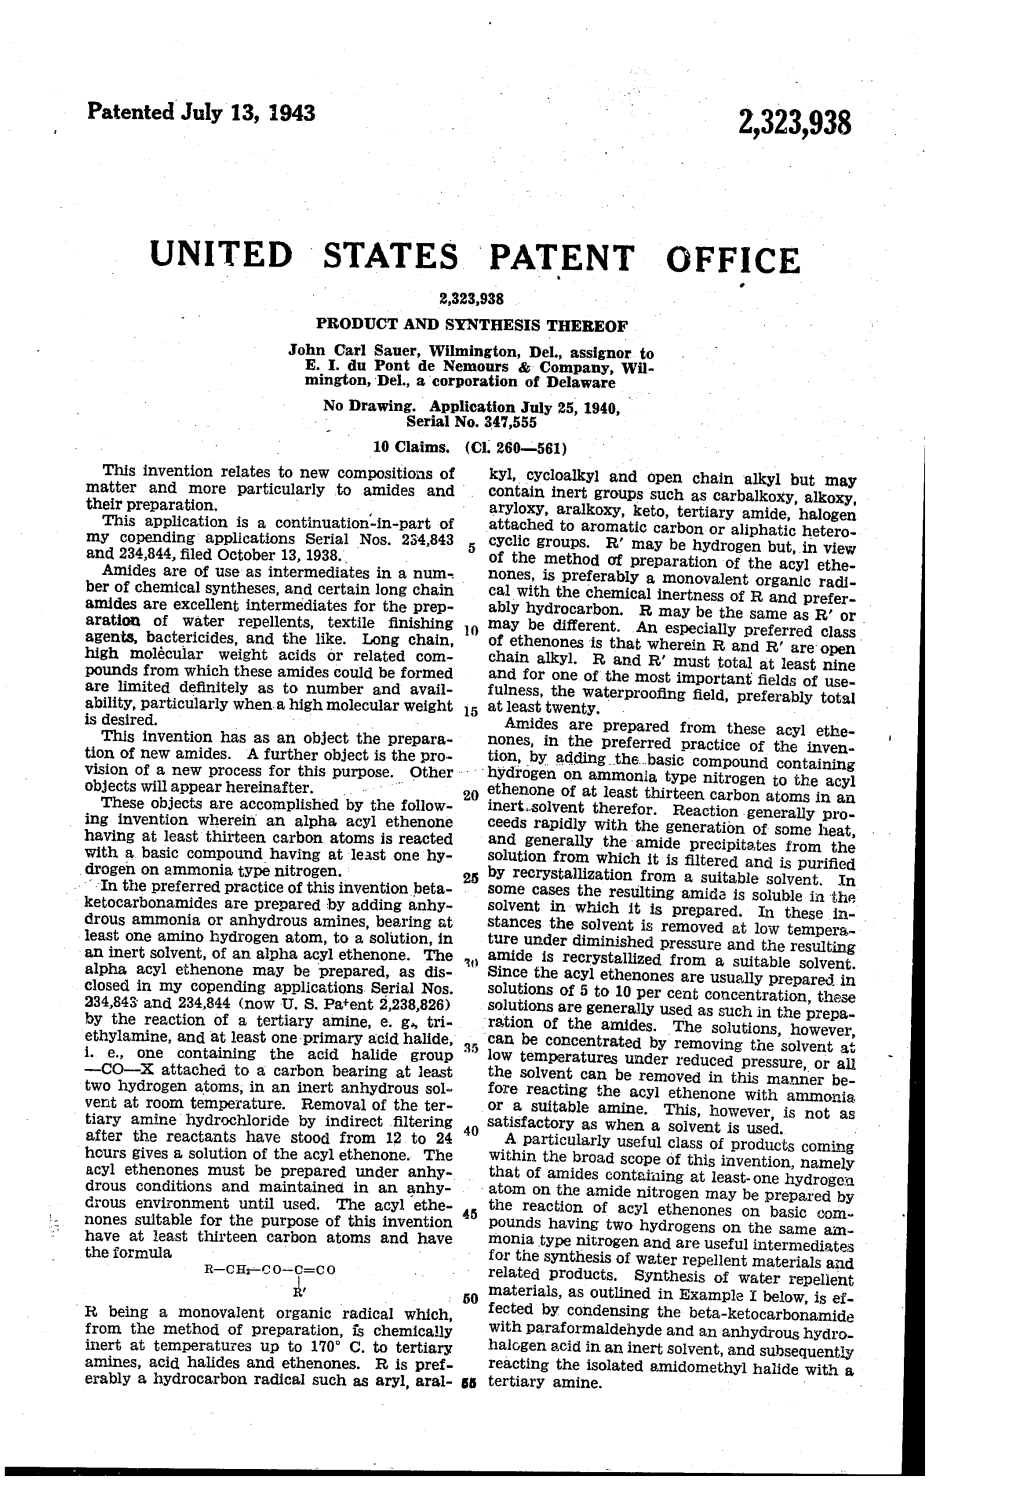 UNITED STATES PATENT Office PRODUCT and Synthesis THEREOF John Carl Sauer, Wilmington, Del, Assignor to E